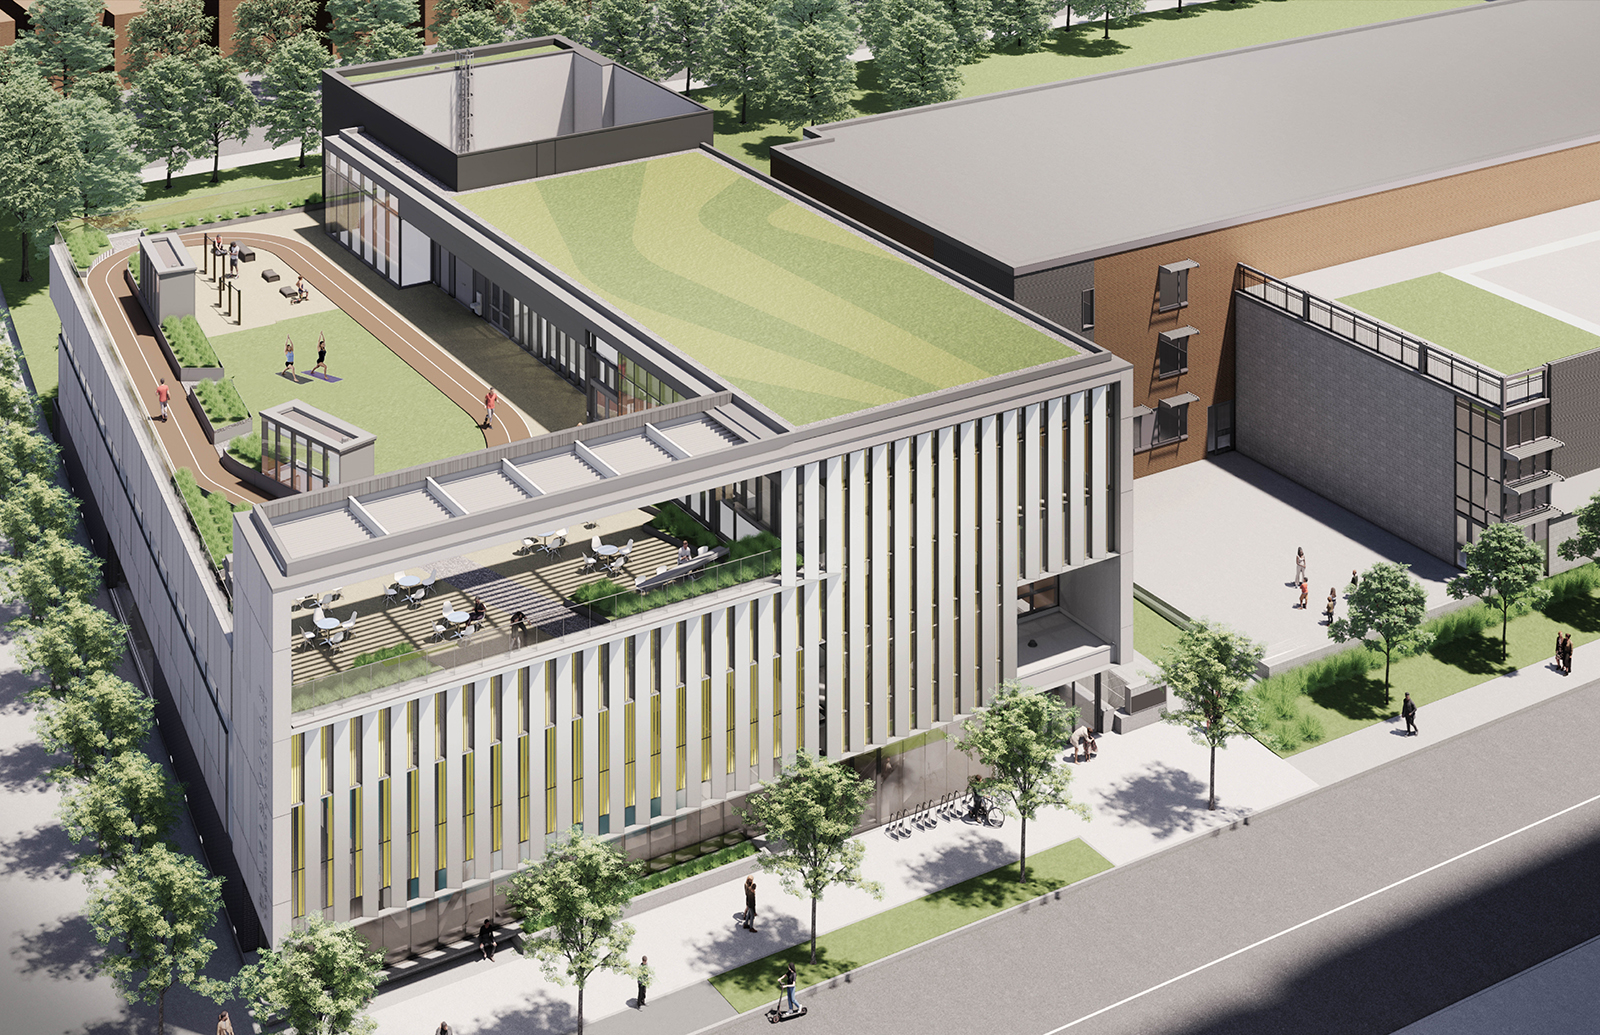 An aerial rendering of the new Centre, view facing northeast, from on top of Davisville Avenue. The third floor rooftop space is pictured here, with pergola and seating area on the south side. In the central and north rooftop space is a walking track surrounding a grassy area and fitness station. Several clerestories provide natural light for the floors below. The west side of the rooftop includes a green roof and mechanical/service space (not publically accessible).